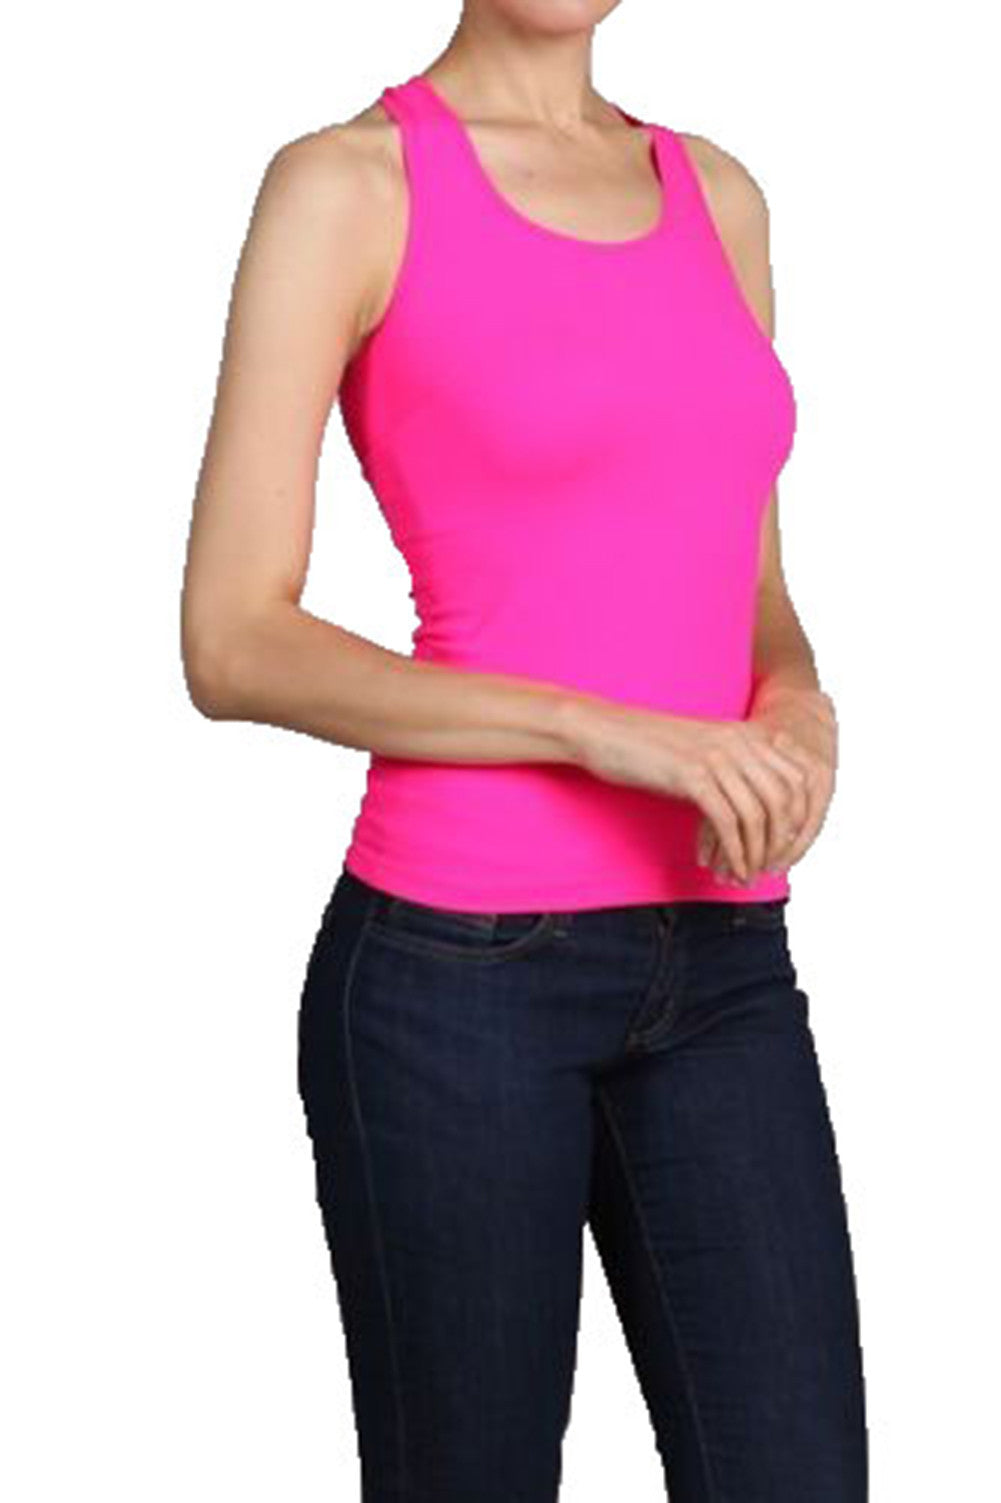 NEON SEAMLESS BASIC RIB-KNIT RACERBACK TANK TOP ONE SIZE ATHLETIC SPORT T-SHIRT - Neon Nation